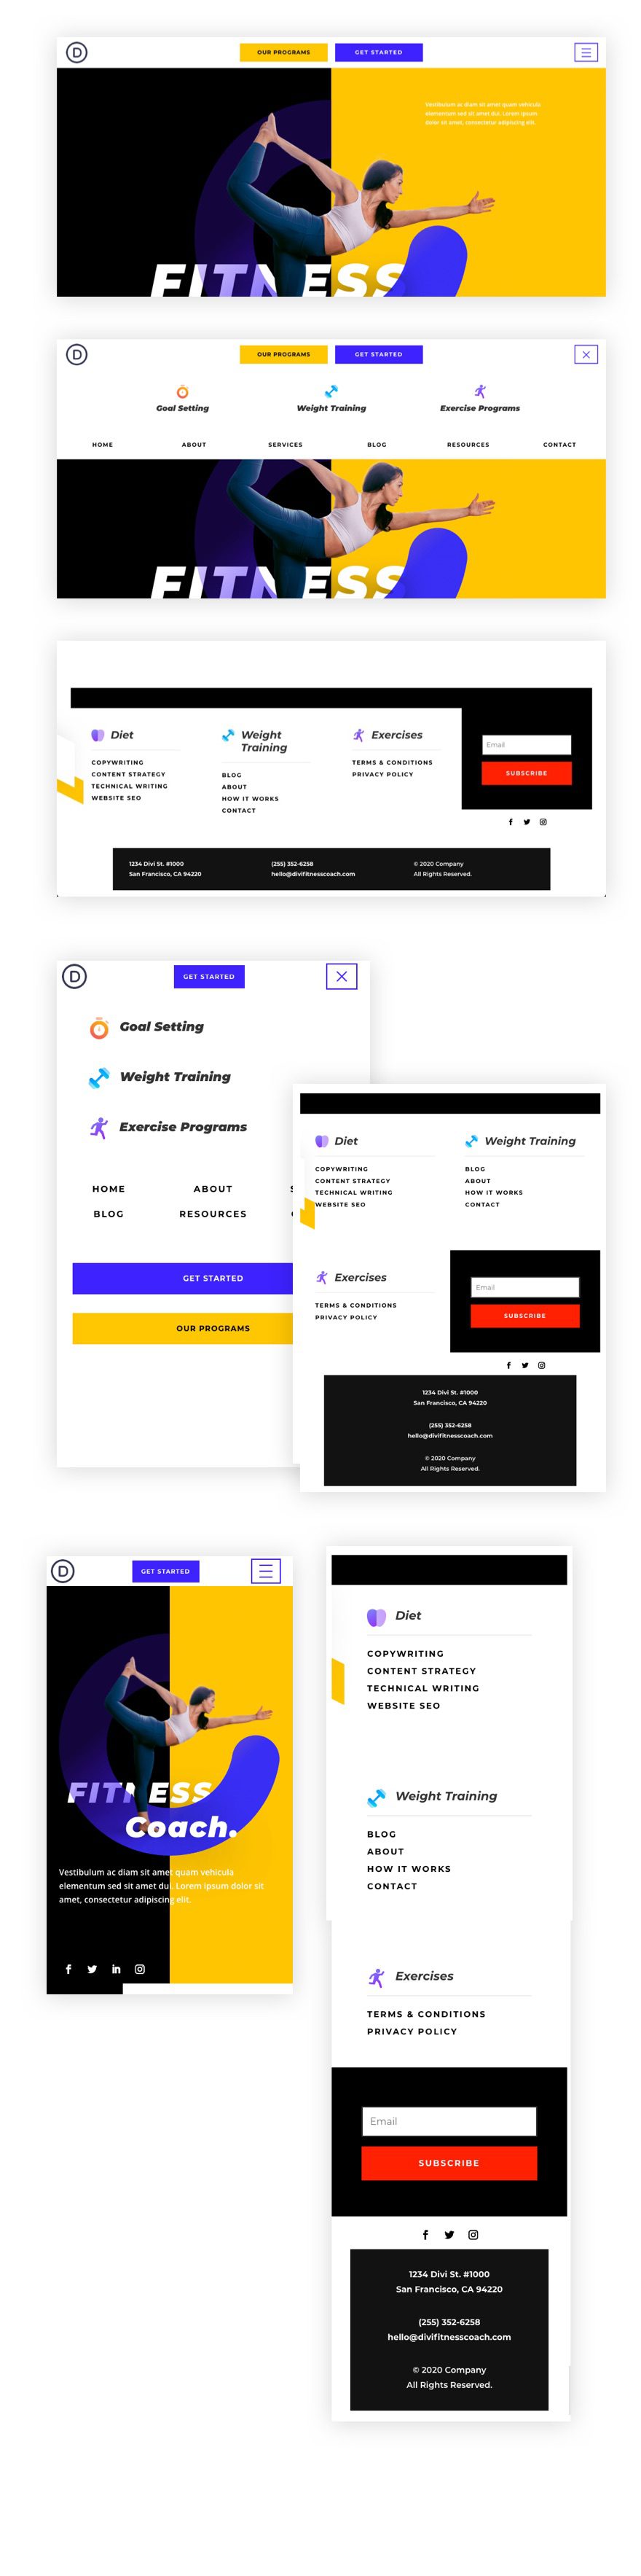 header and footer template for Divi's Fitness Coach Layout Pack